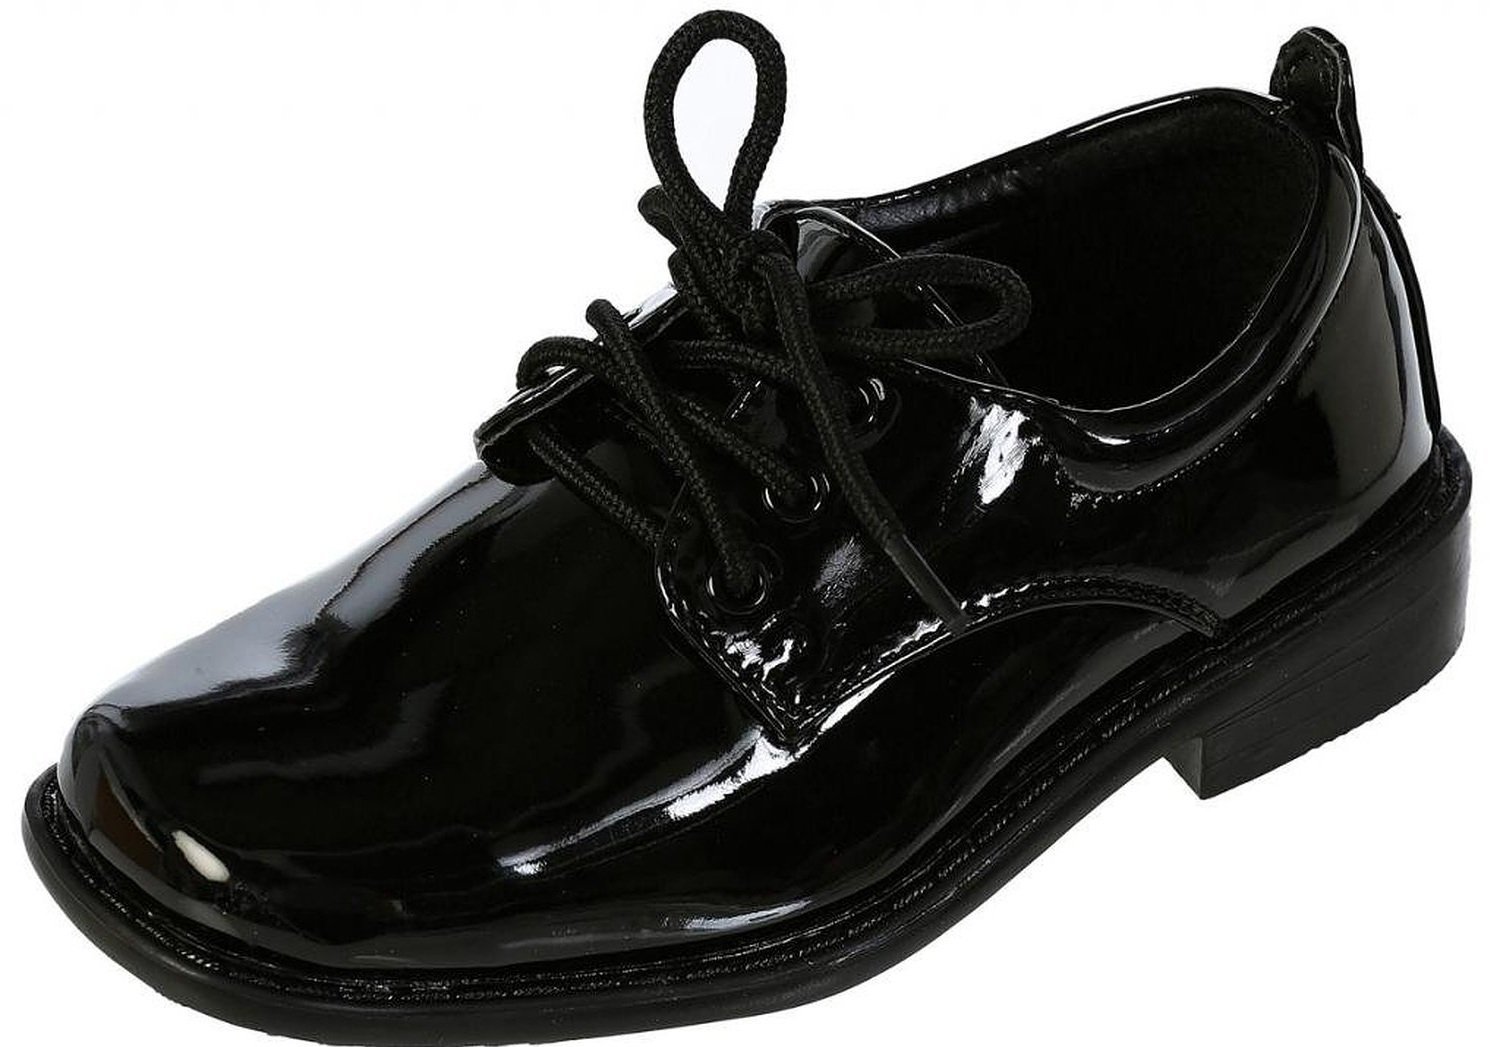 Boys Square Toe Lace Up Oxford Patent Dress Shoes - Available in Black 10 Toddler